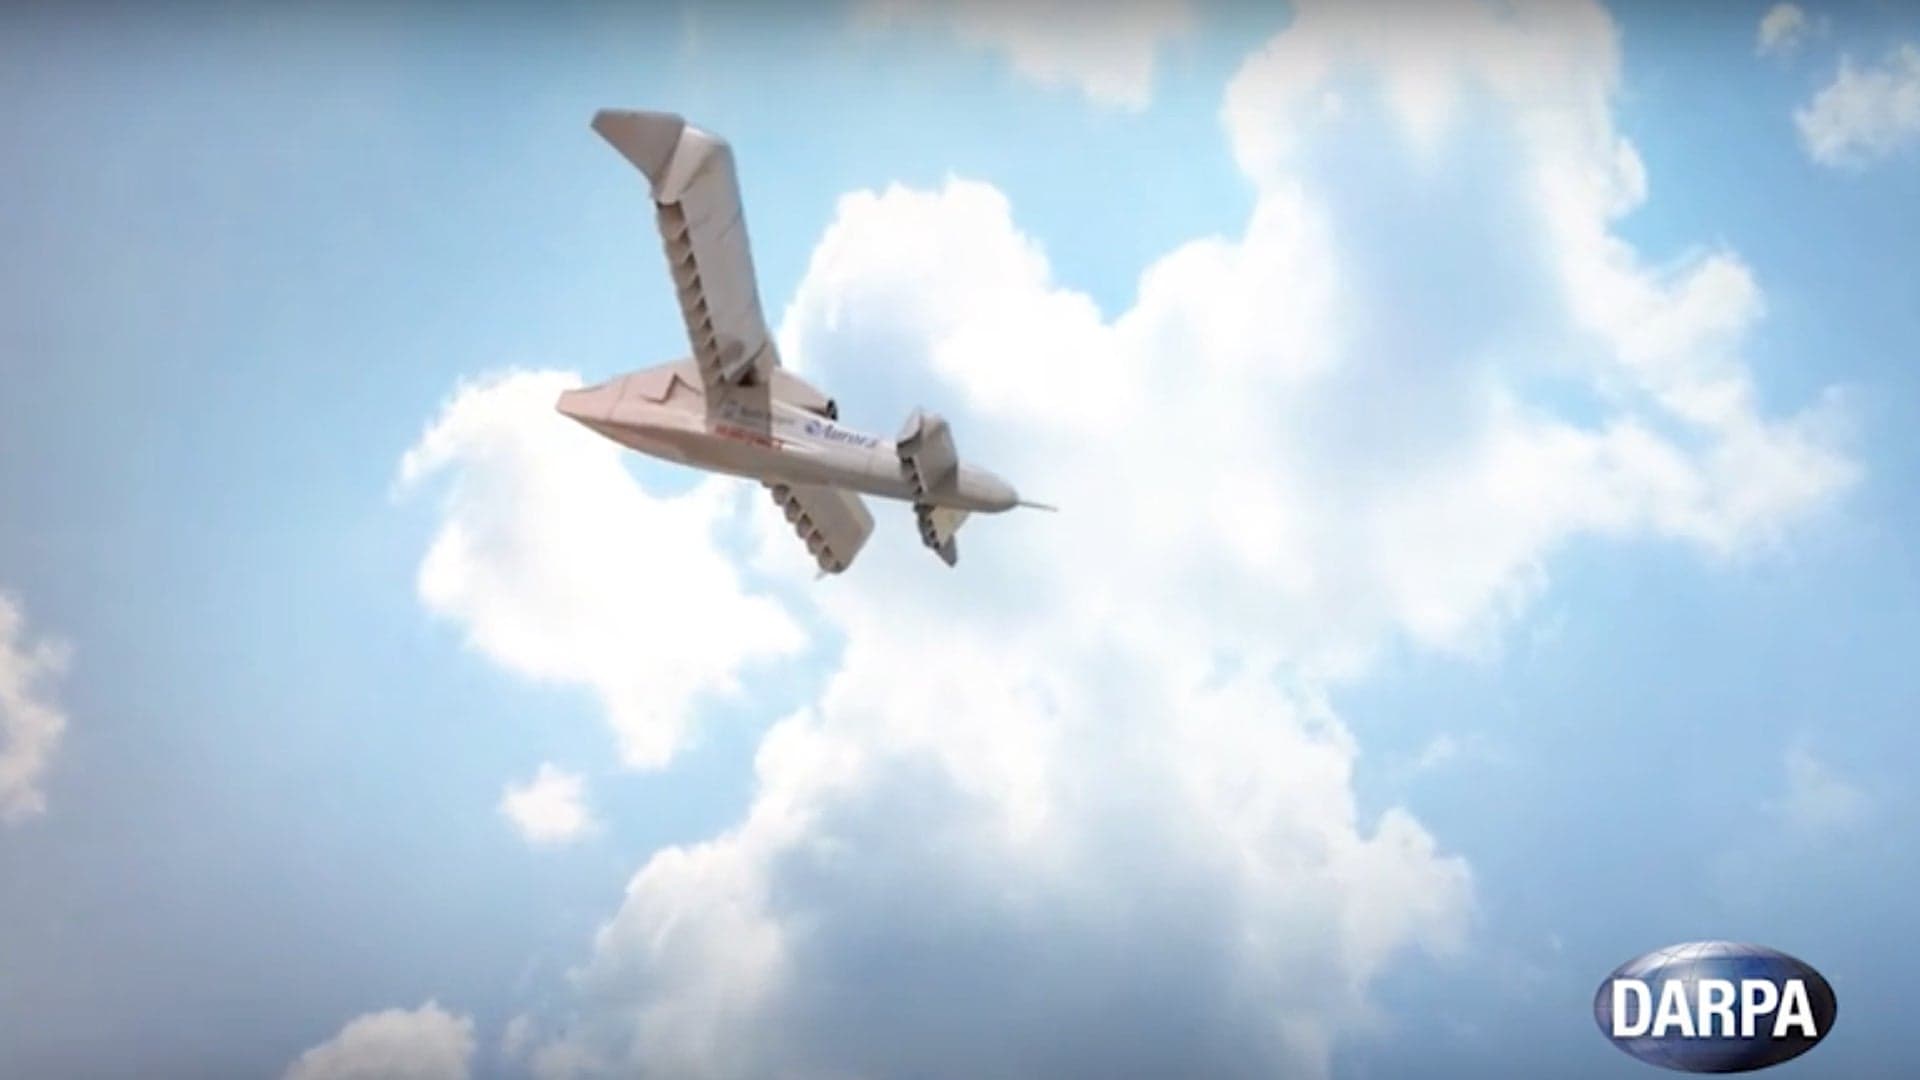 DARPA’s New Drone Concept Has 24 Engines